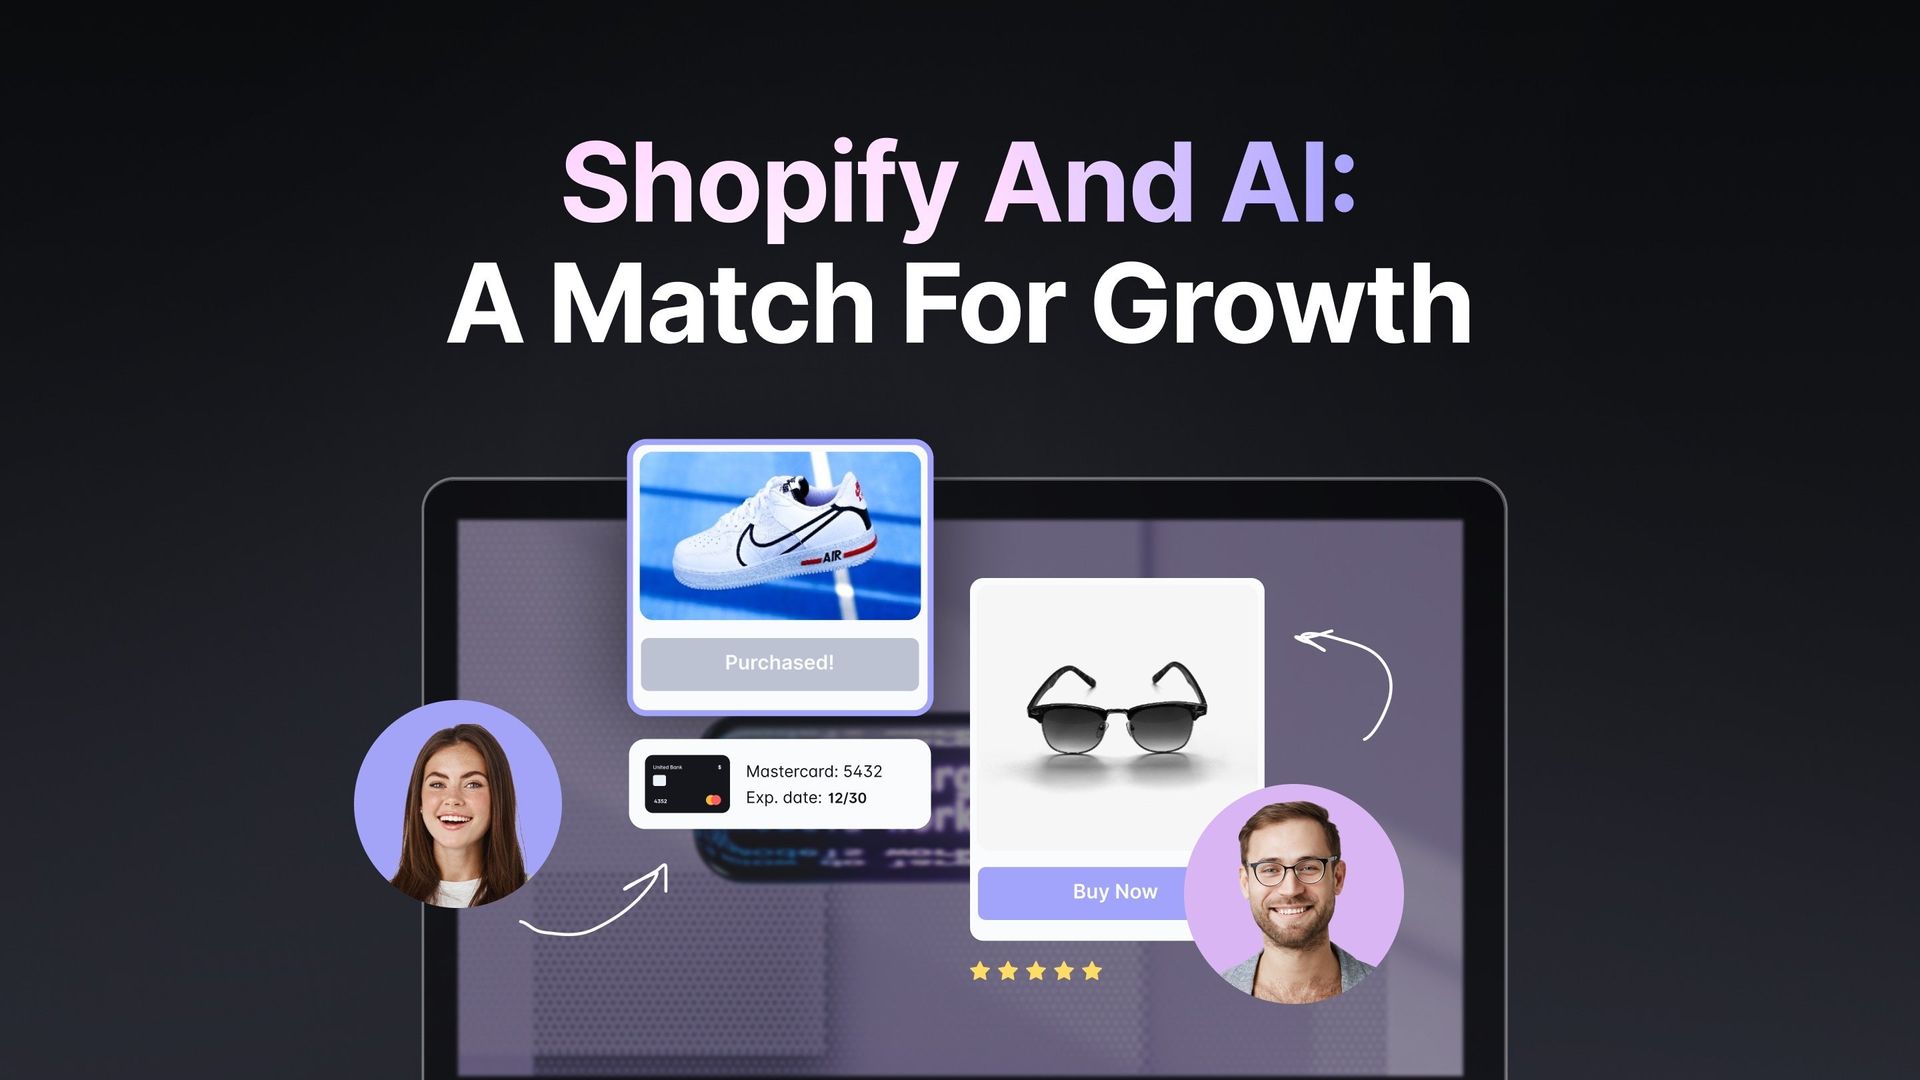 https://claid.ai/static/9c6e7bbd84e8d5acc292e50860027f07/a464d/Shopify_and_AI_A_Match_for_Growth_2668f67c00.jpg